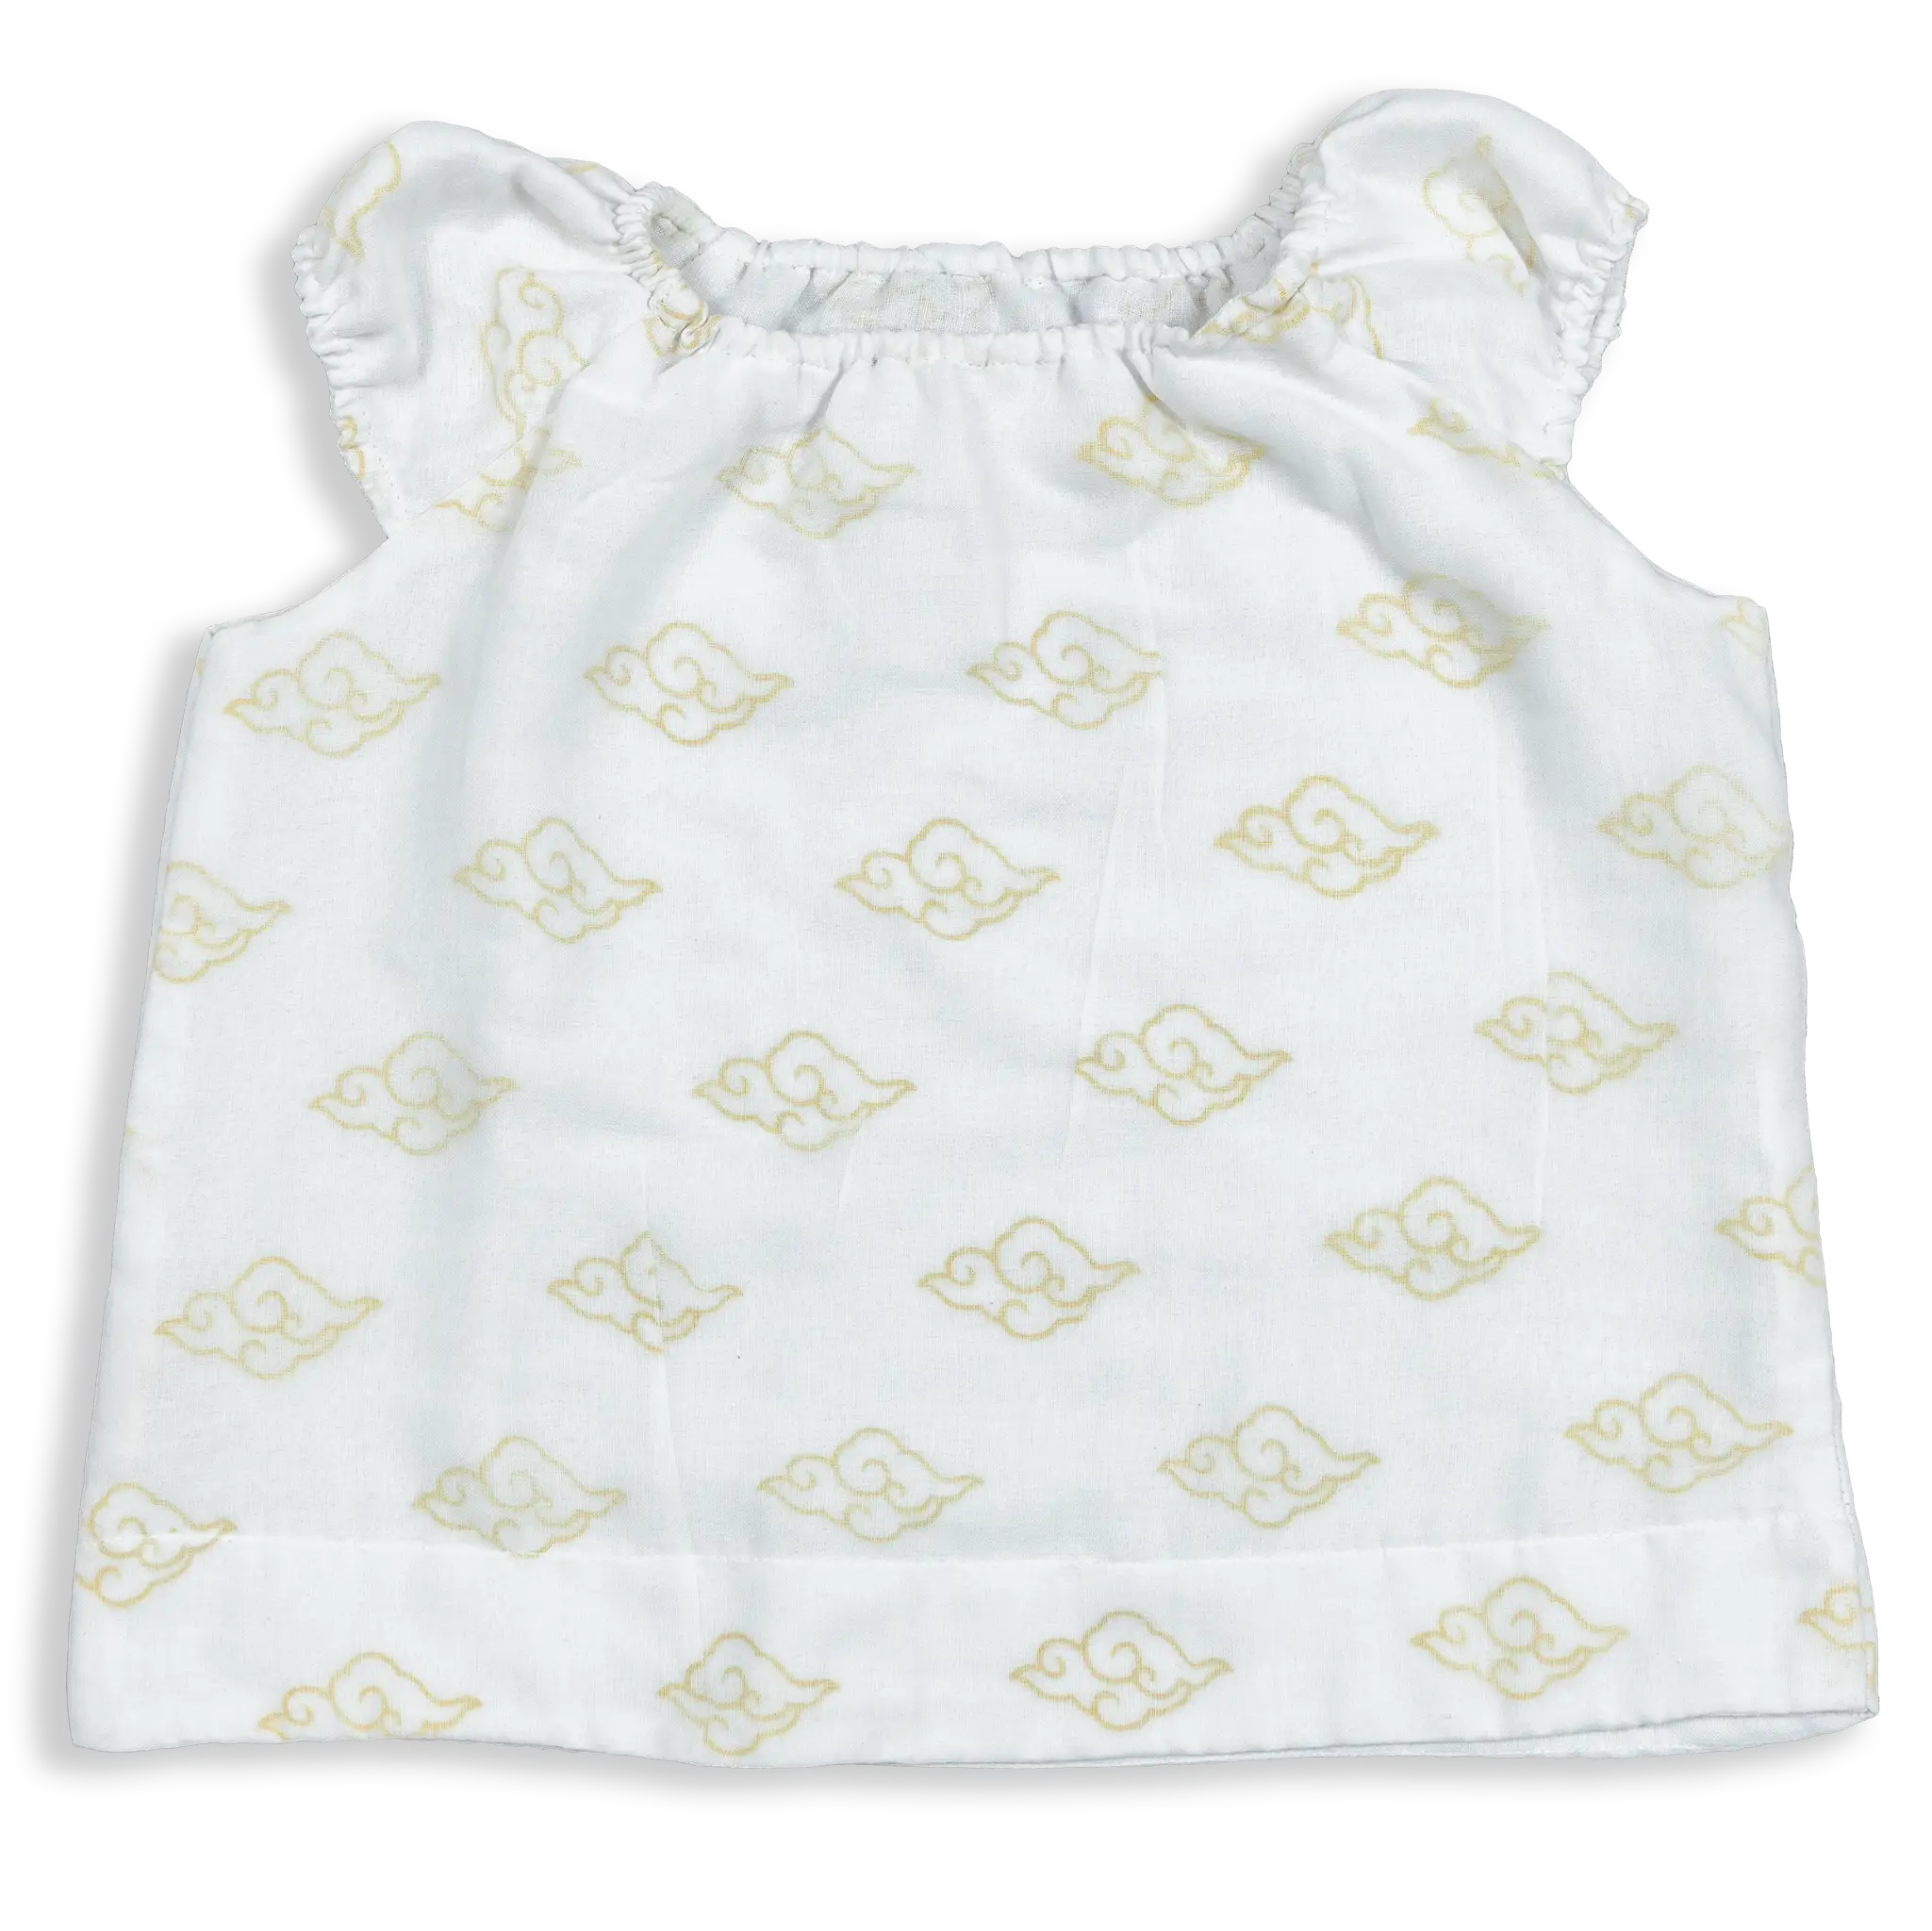 These Dresses are made with 3 layers of finest voile cotton (Mal Mal). It gives a smooth and comforting feel to your baby's skin. Easy wear and good for the skin.